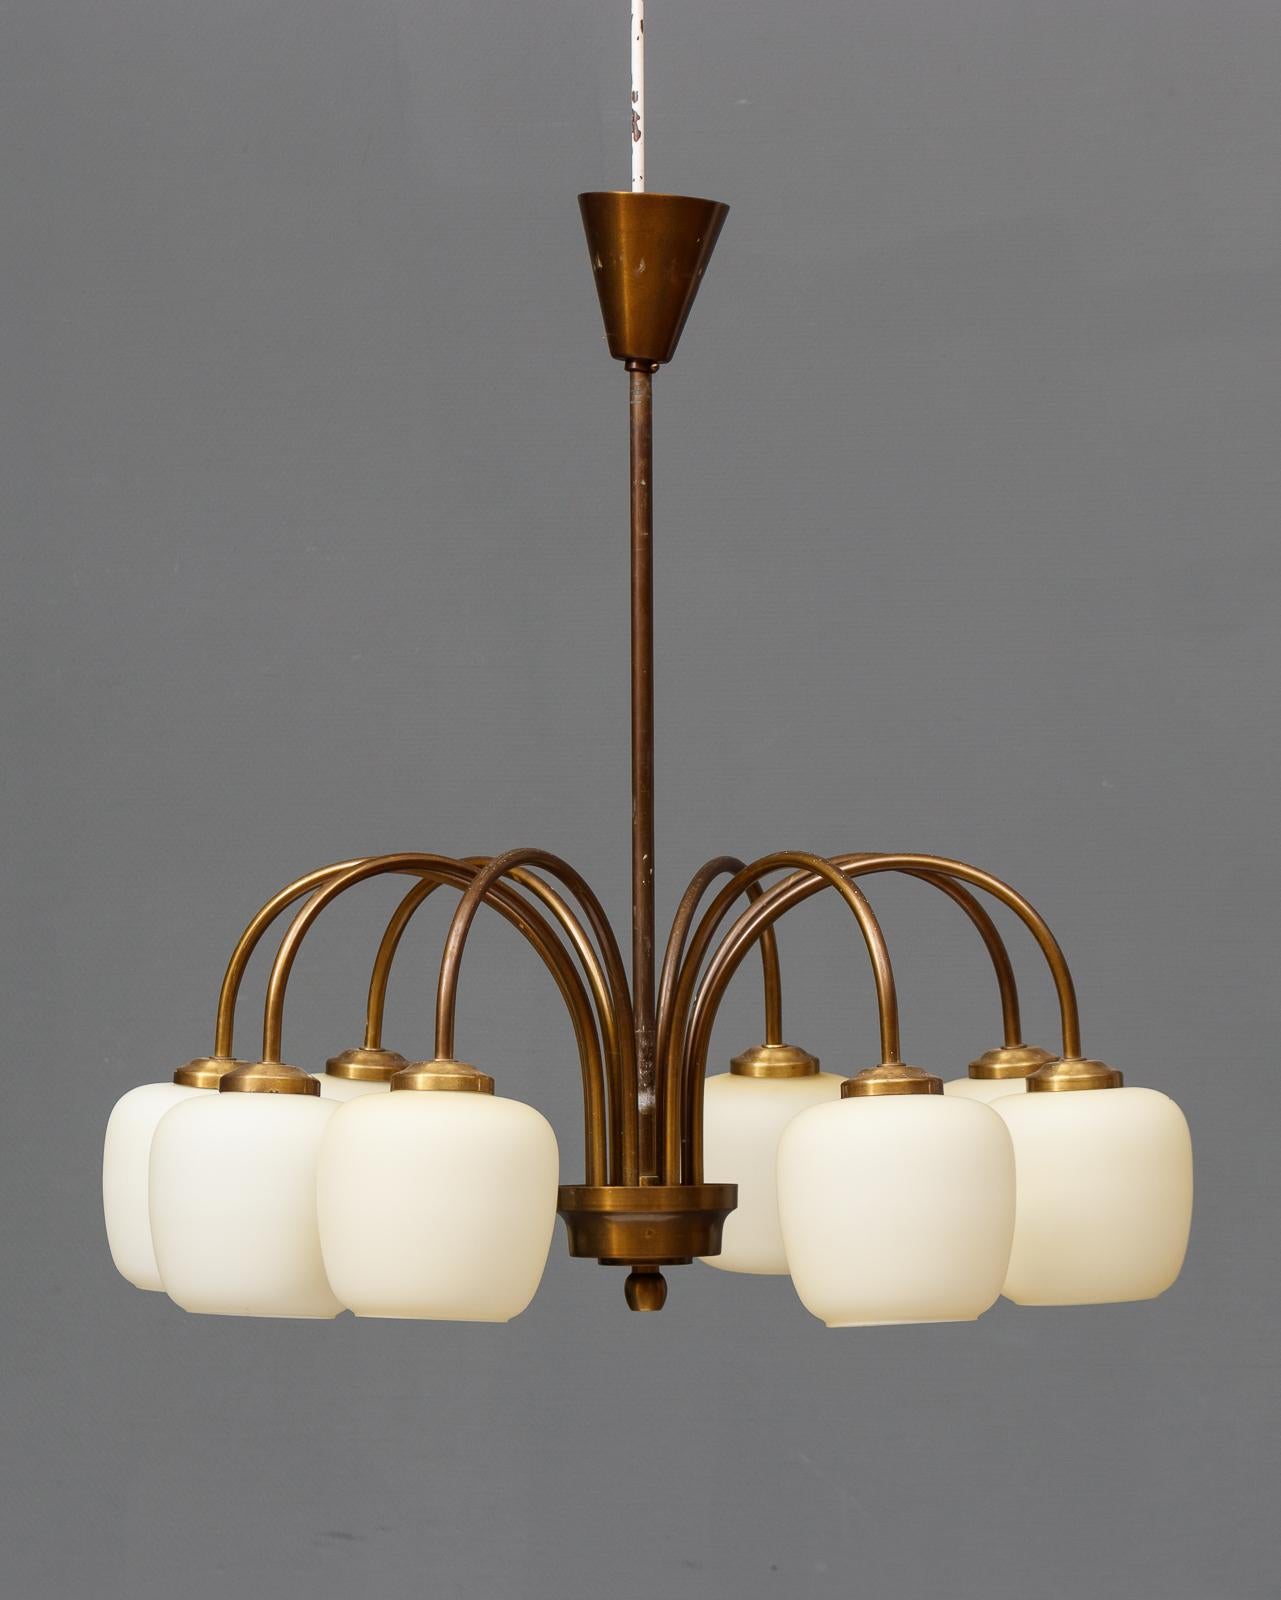 The company started as an agent and wholesaler business in Aarhus, and in 1906, the company moved to Copenhagen, and began specializing in lighting. Opening their first factory on 1 April 1915, at Nørregade 7, and by starting up production of lamps